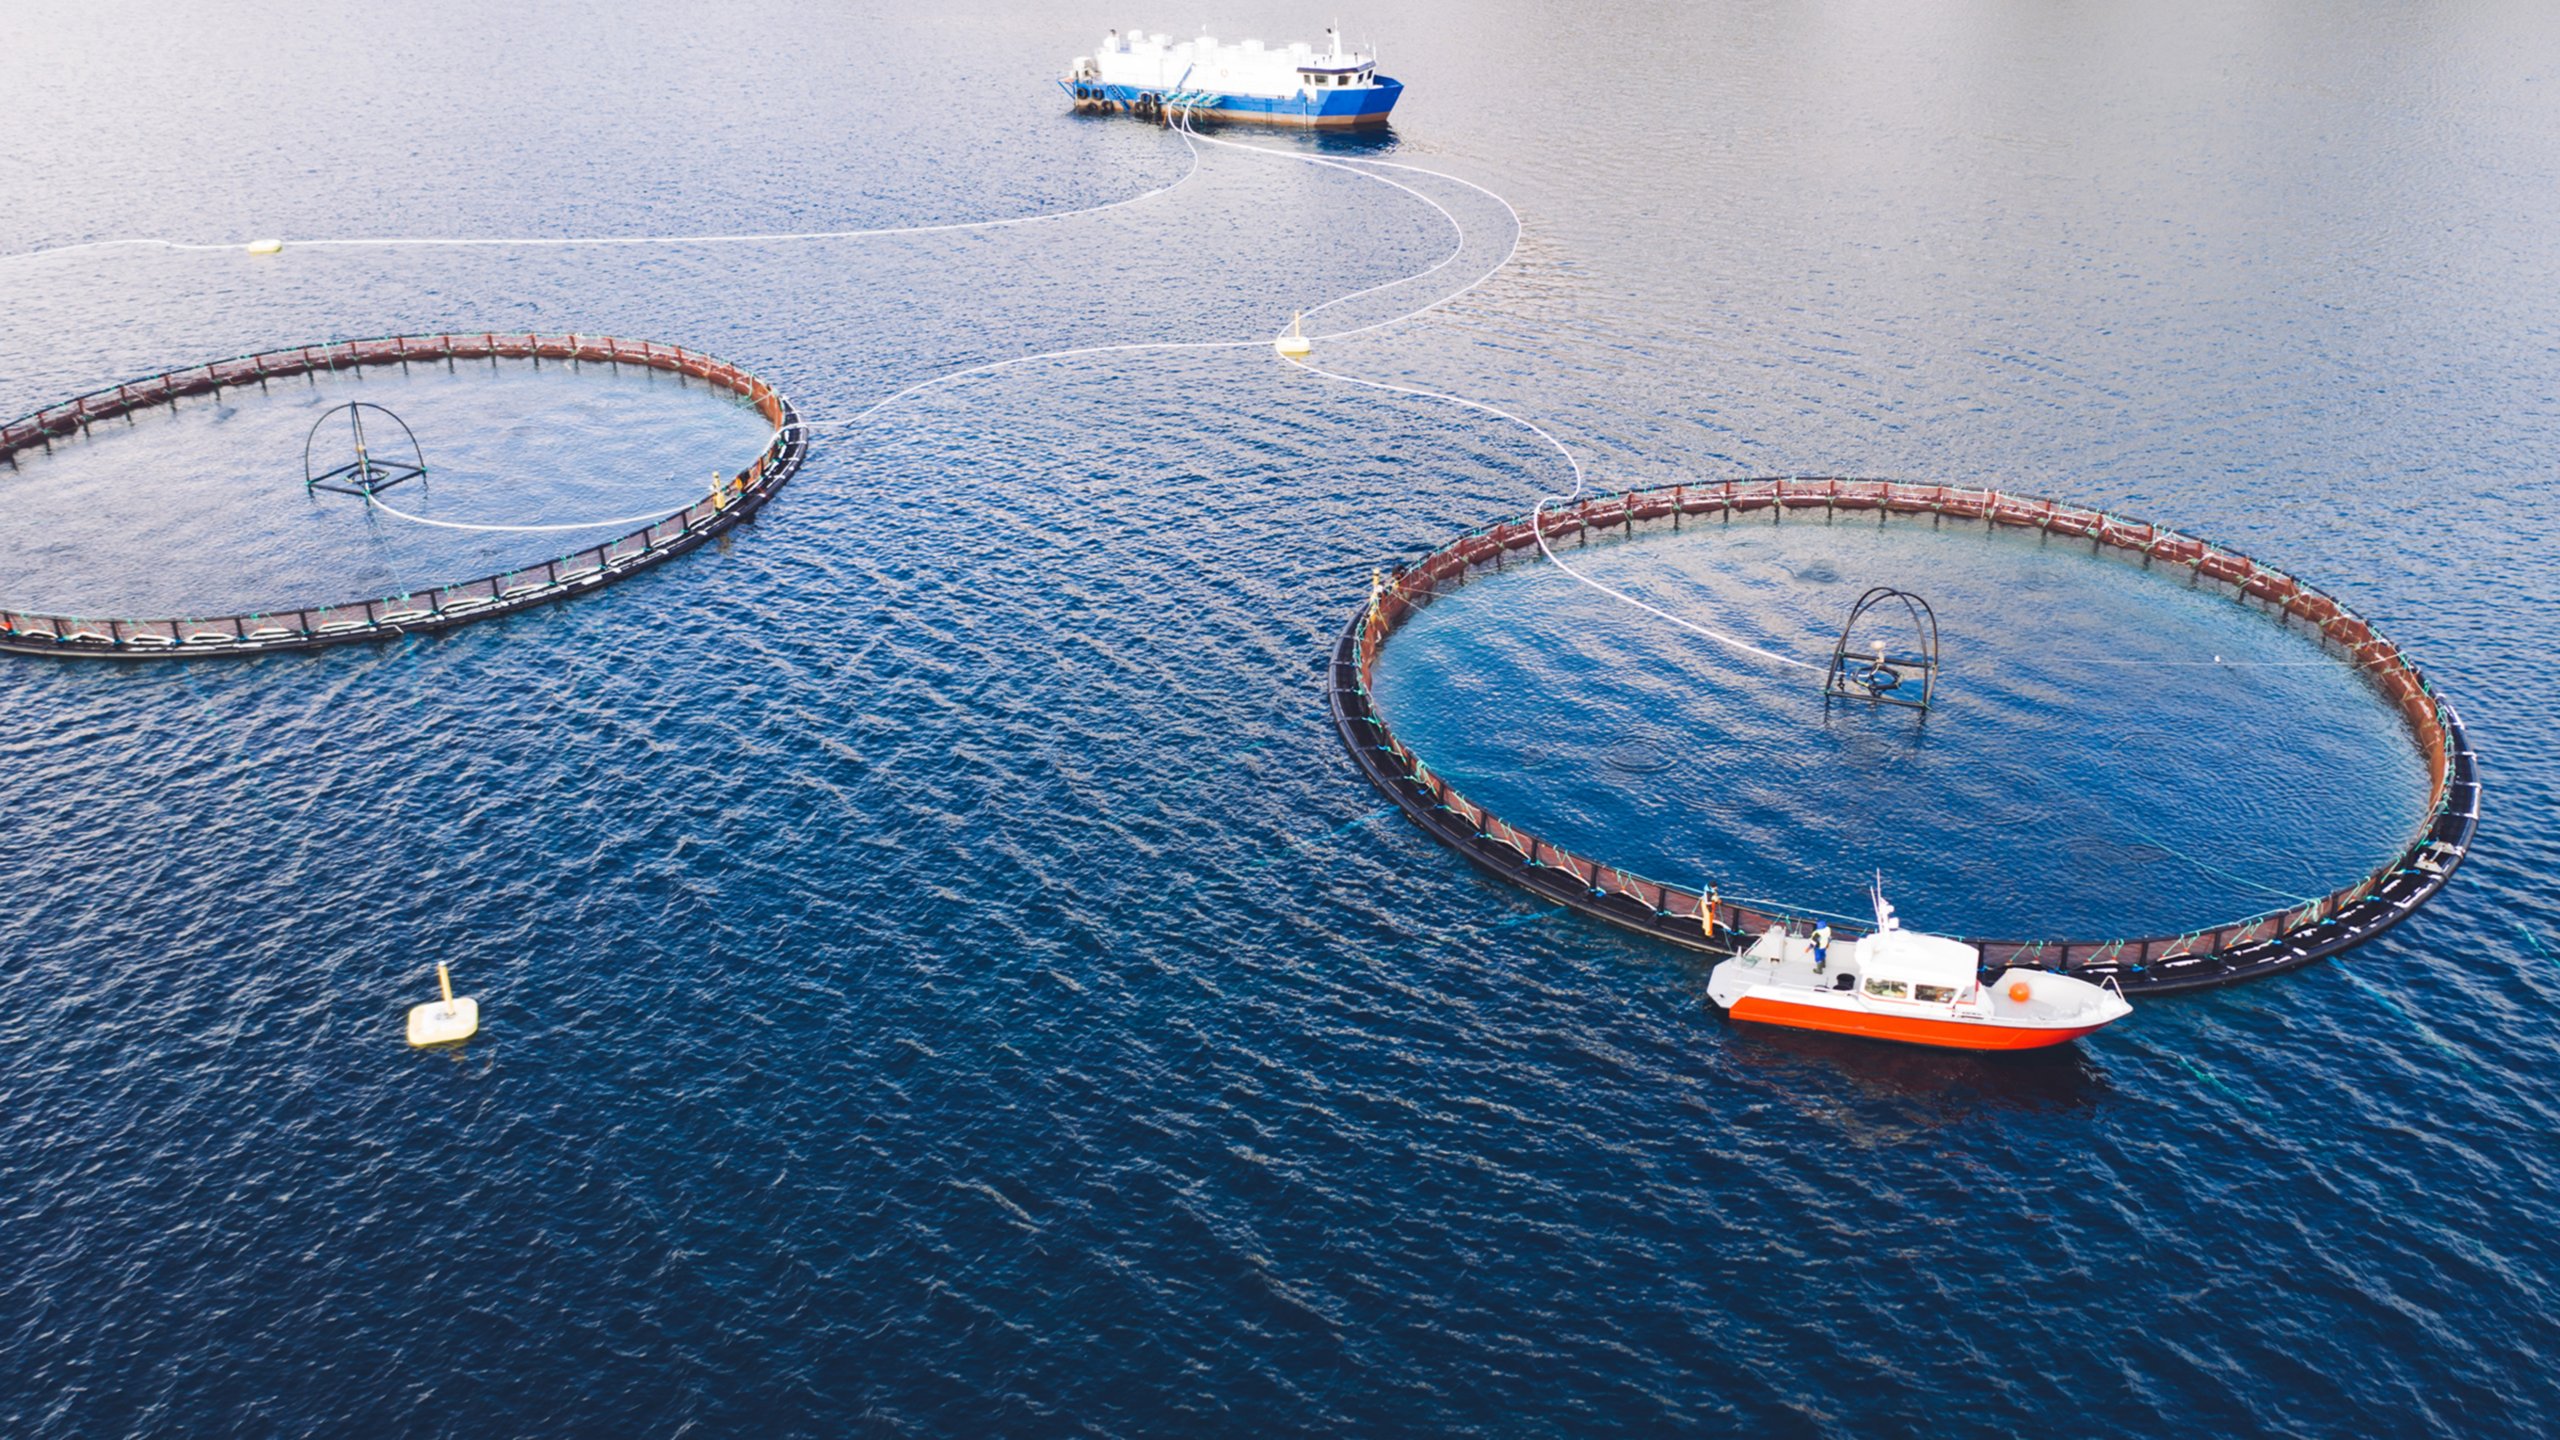 Two fishing rings for seafood production in a large body of water. A larger fishing boat is connected to both rings near the bottom of the image. A smaller fishing boat is near the top of the ring on the right.